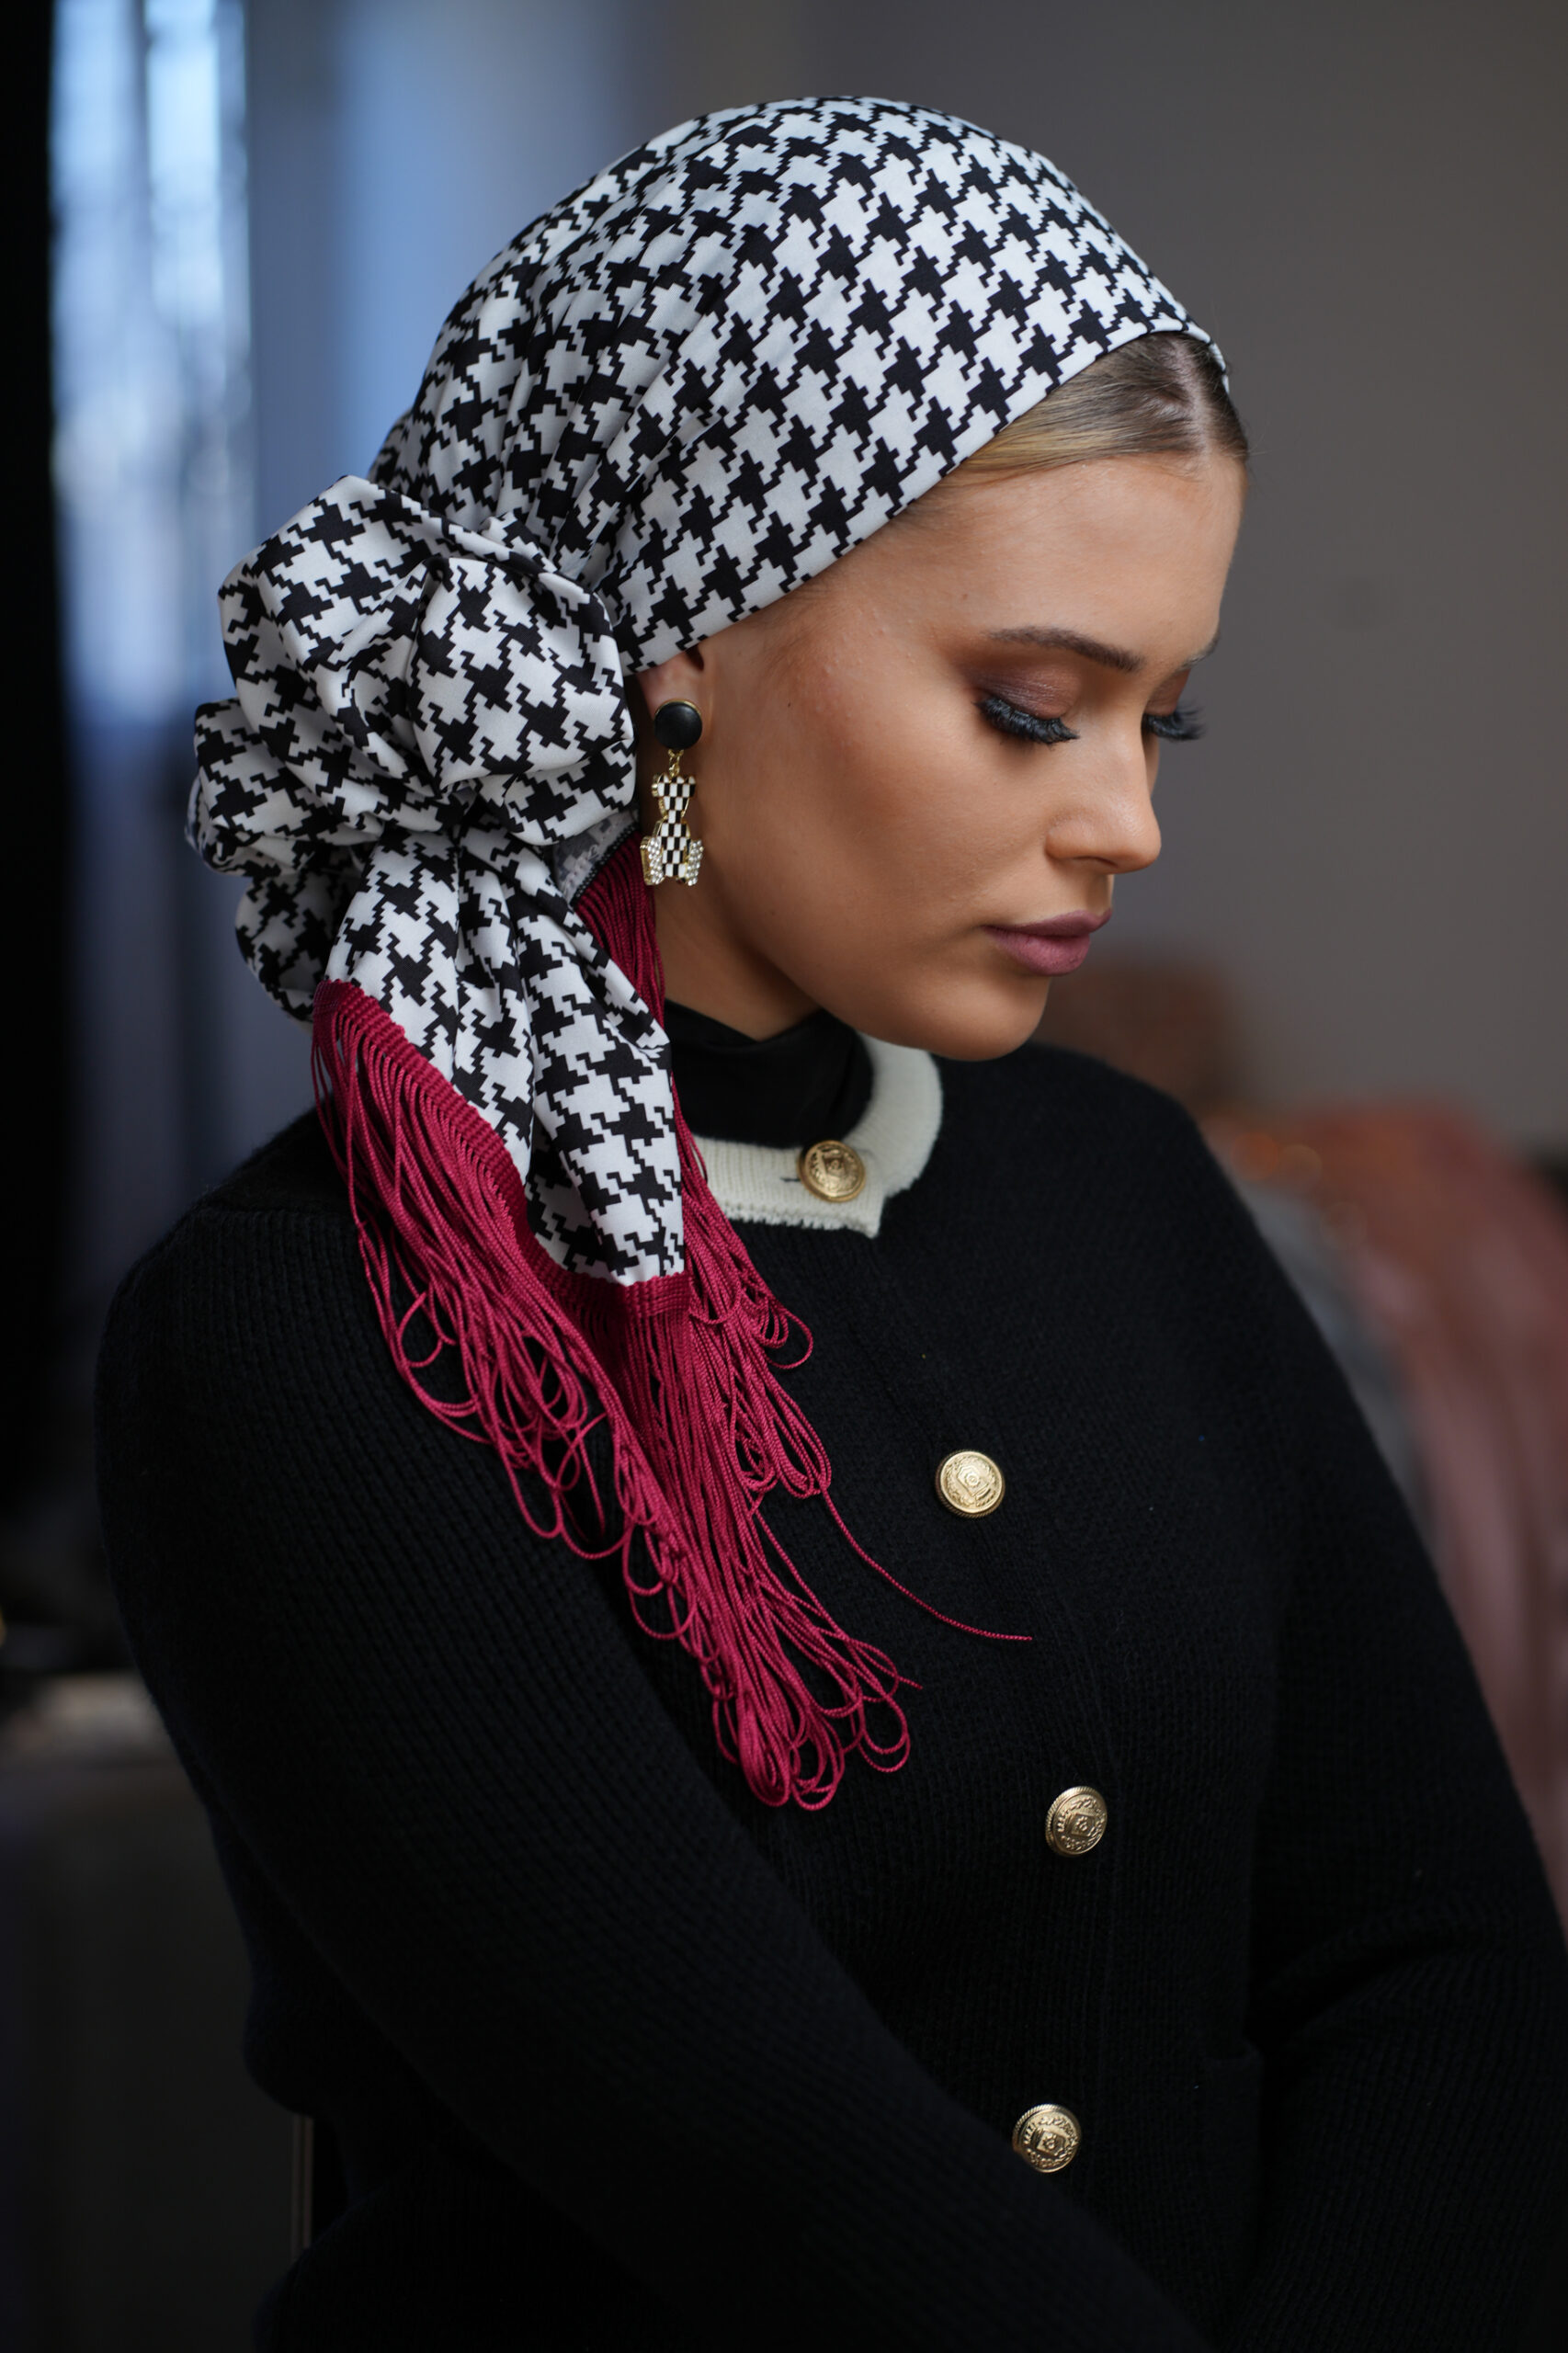 Printed Black And White headscarf With Or Without Red Fringes